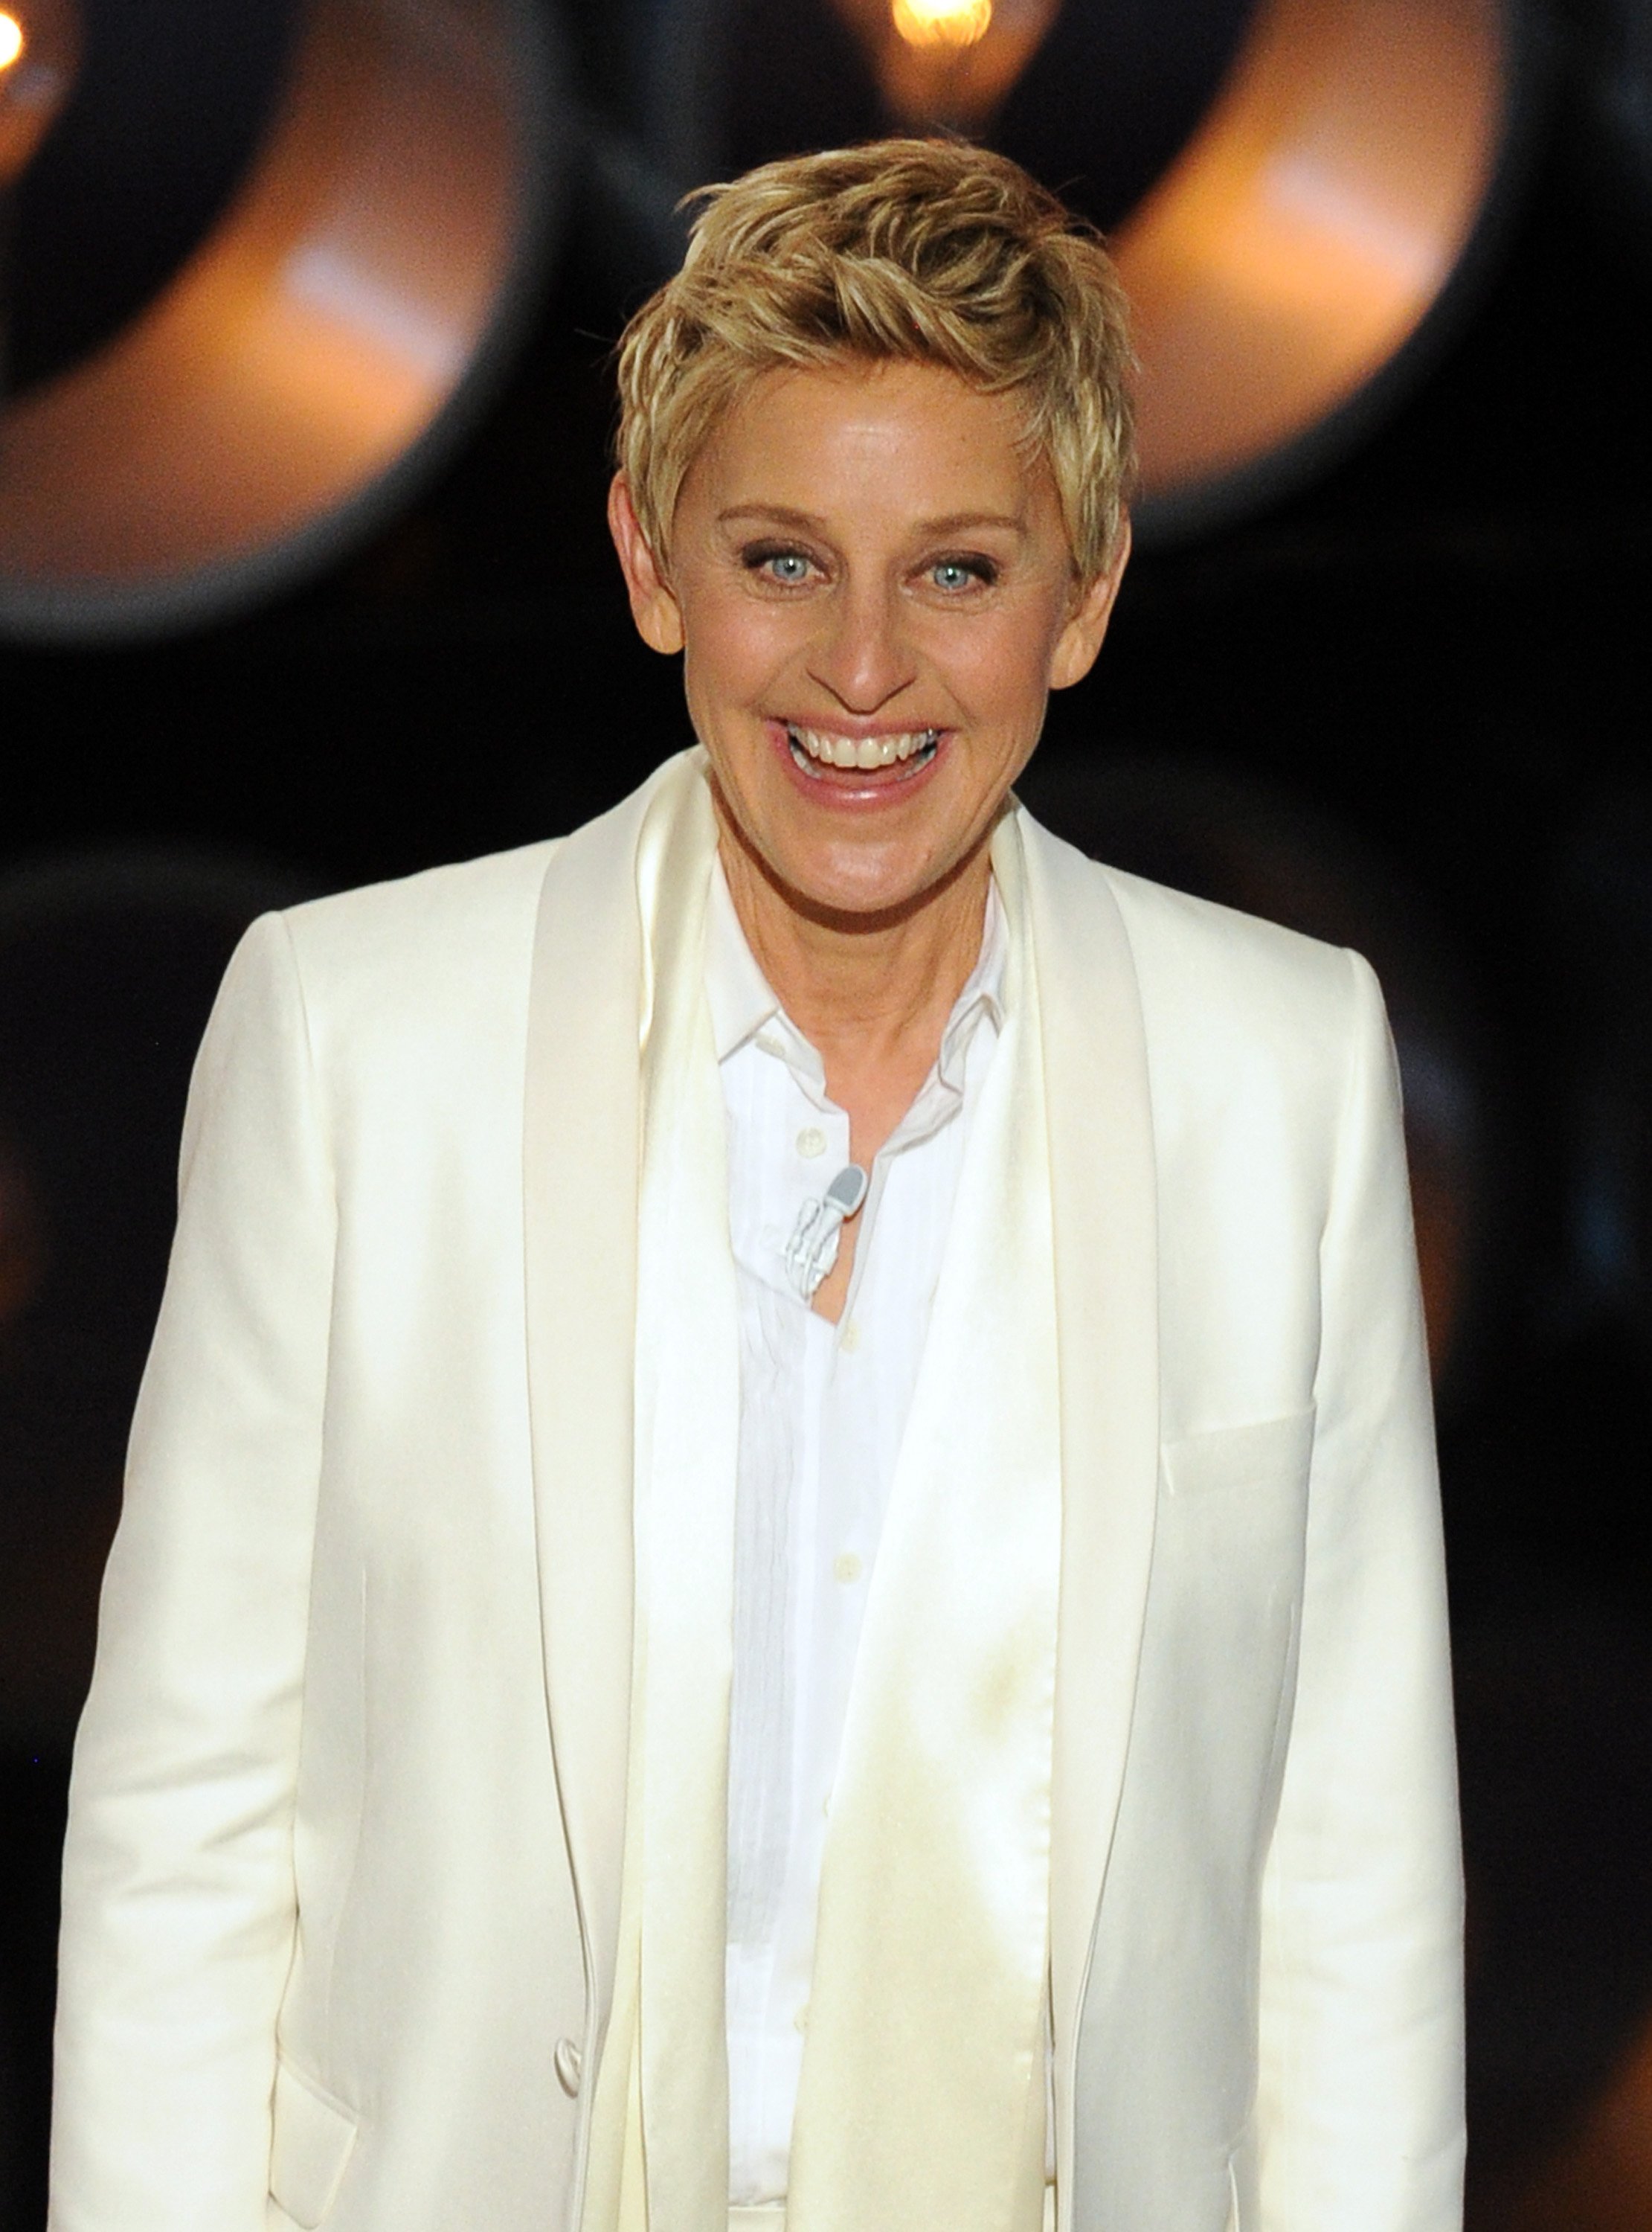 Ellen DeGeneres smiles for the camera on March 2, 2014 in Hollywood, California | Source: Getty Images